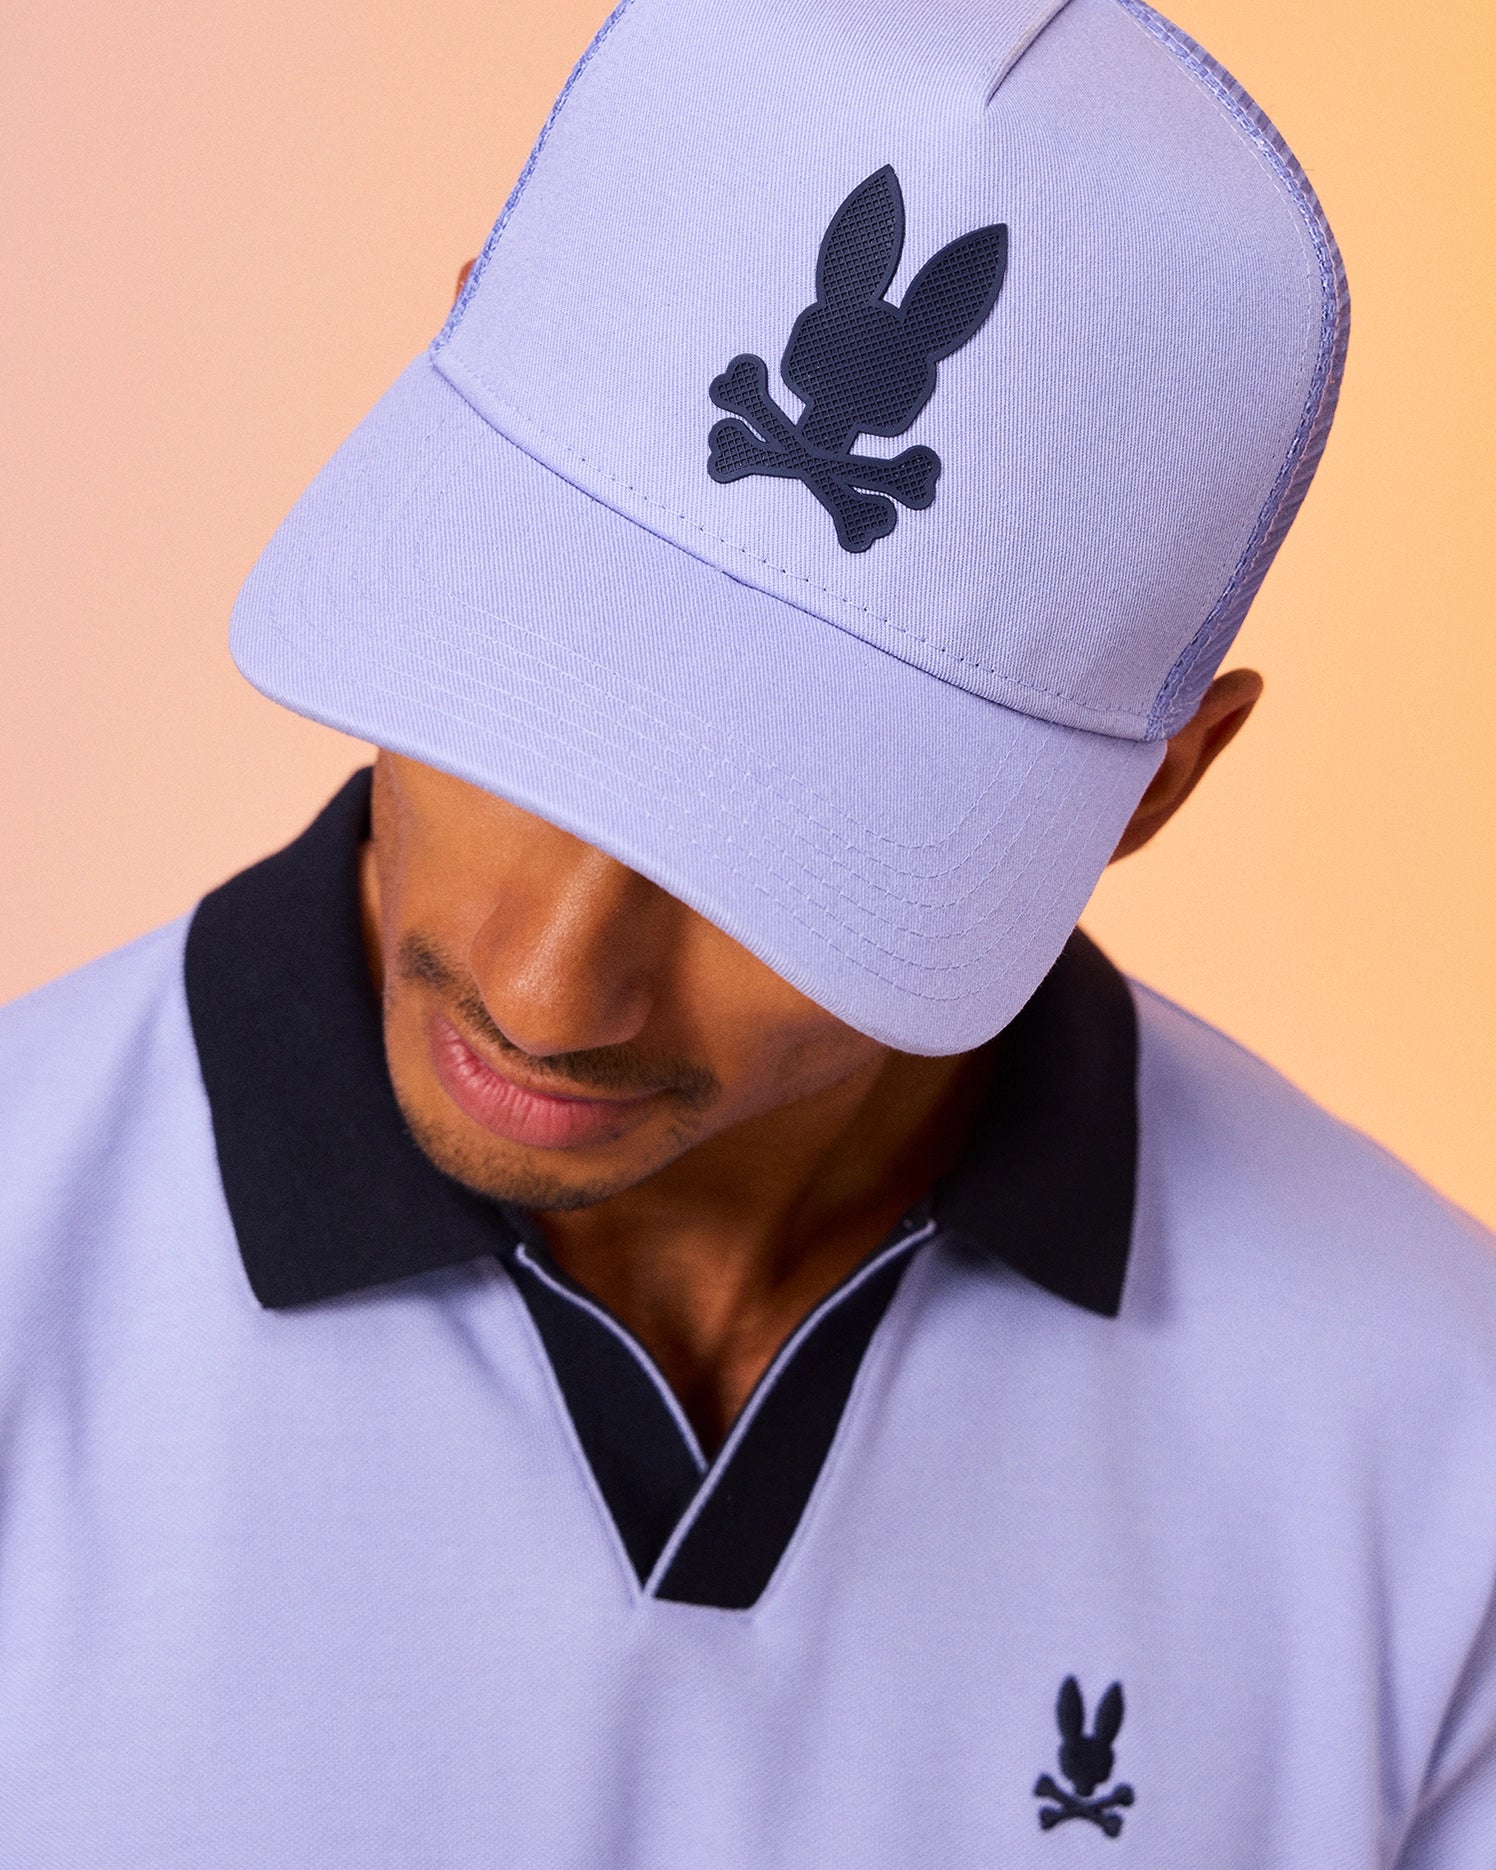 A man wearing a light purple Psycho Bunny MENS RIVIERA TRUCKER CAP - B6A667C200 with a black bunny and crossbones logo looks down. He is also dressed in a matching light purple polo shirt featuring the same logo. The background has a warm gradient, creating a stylish and cohesive look with early 2000s nostalgia.